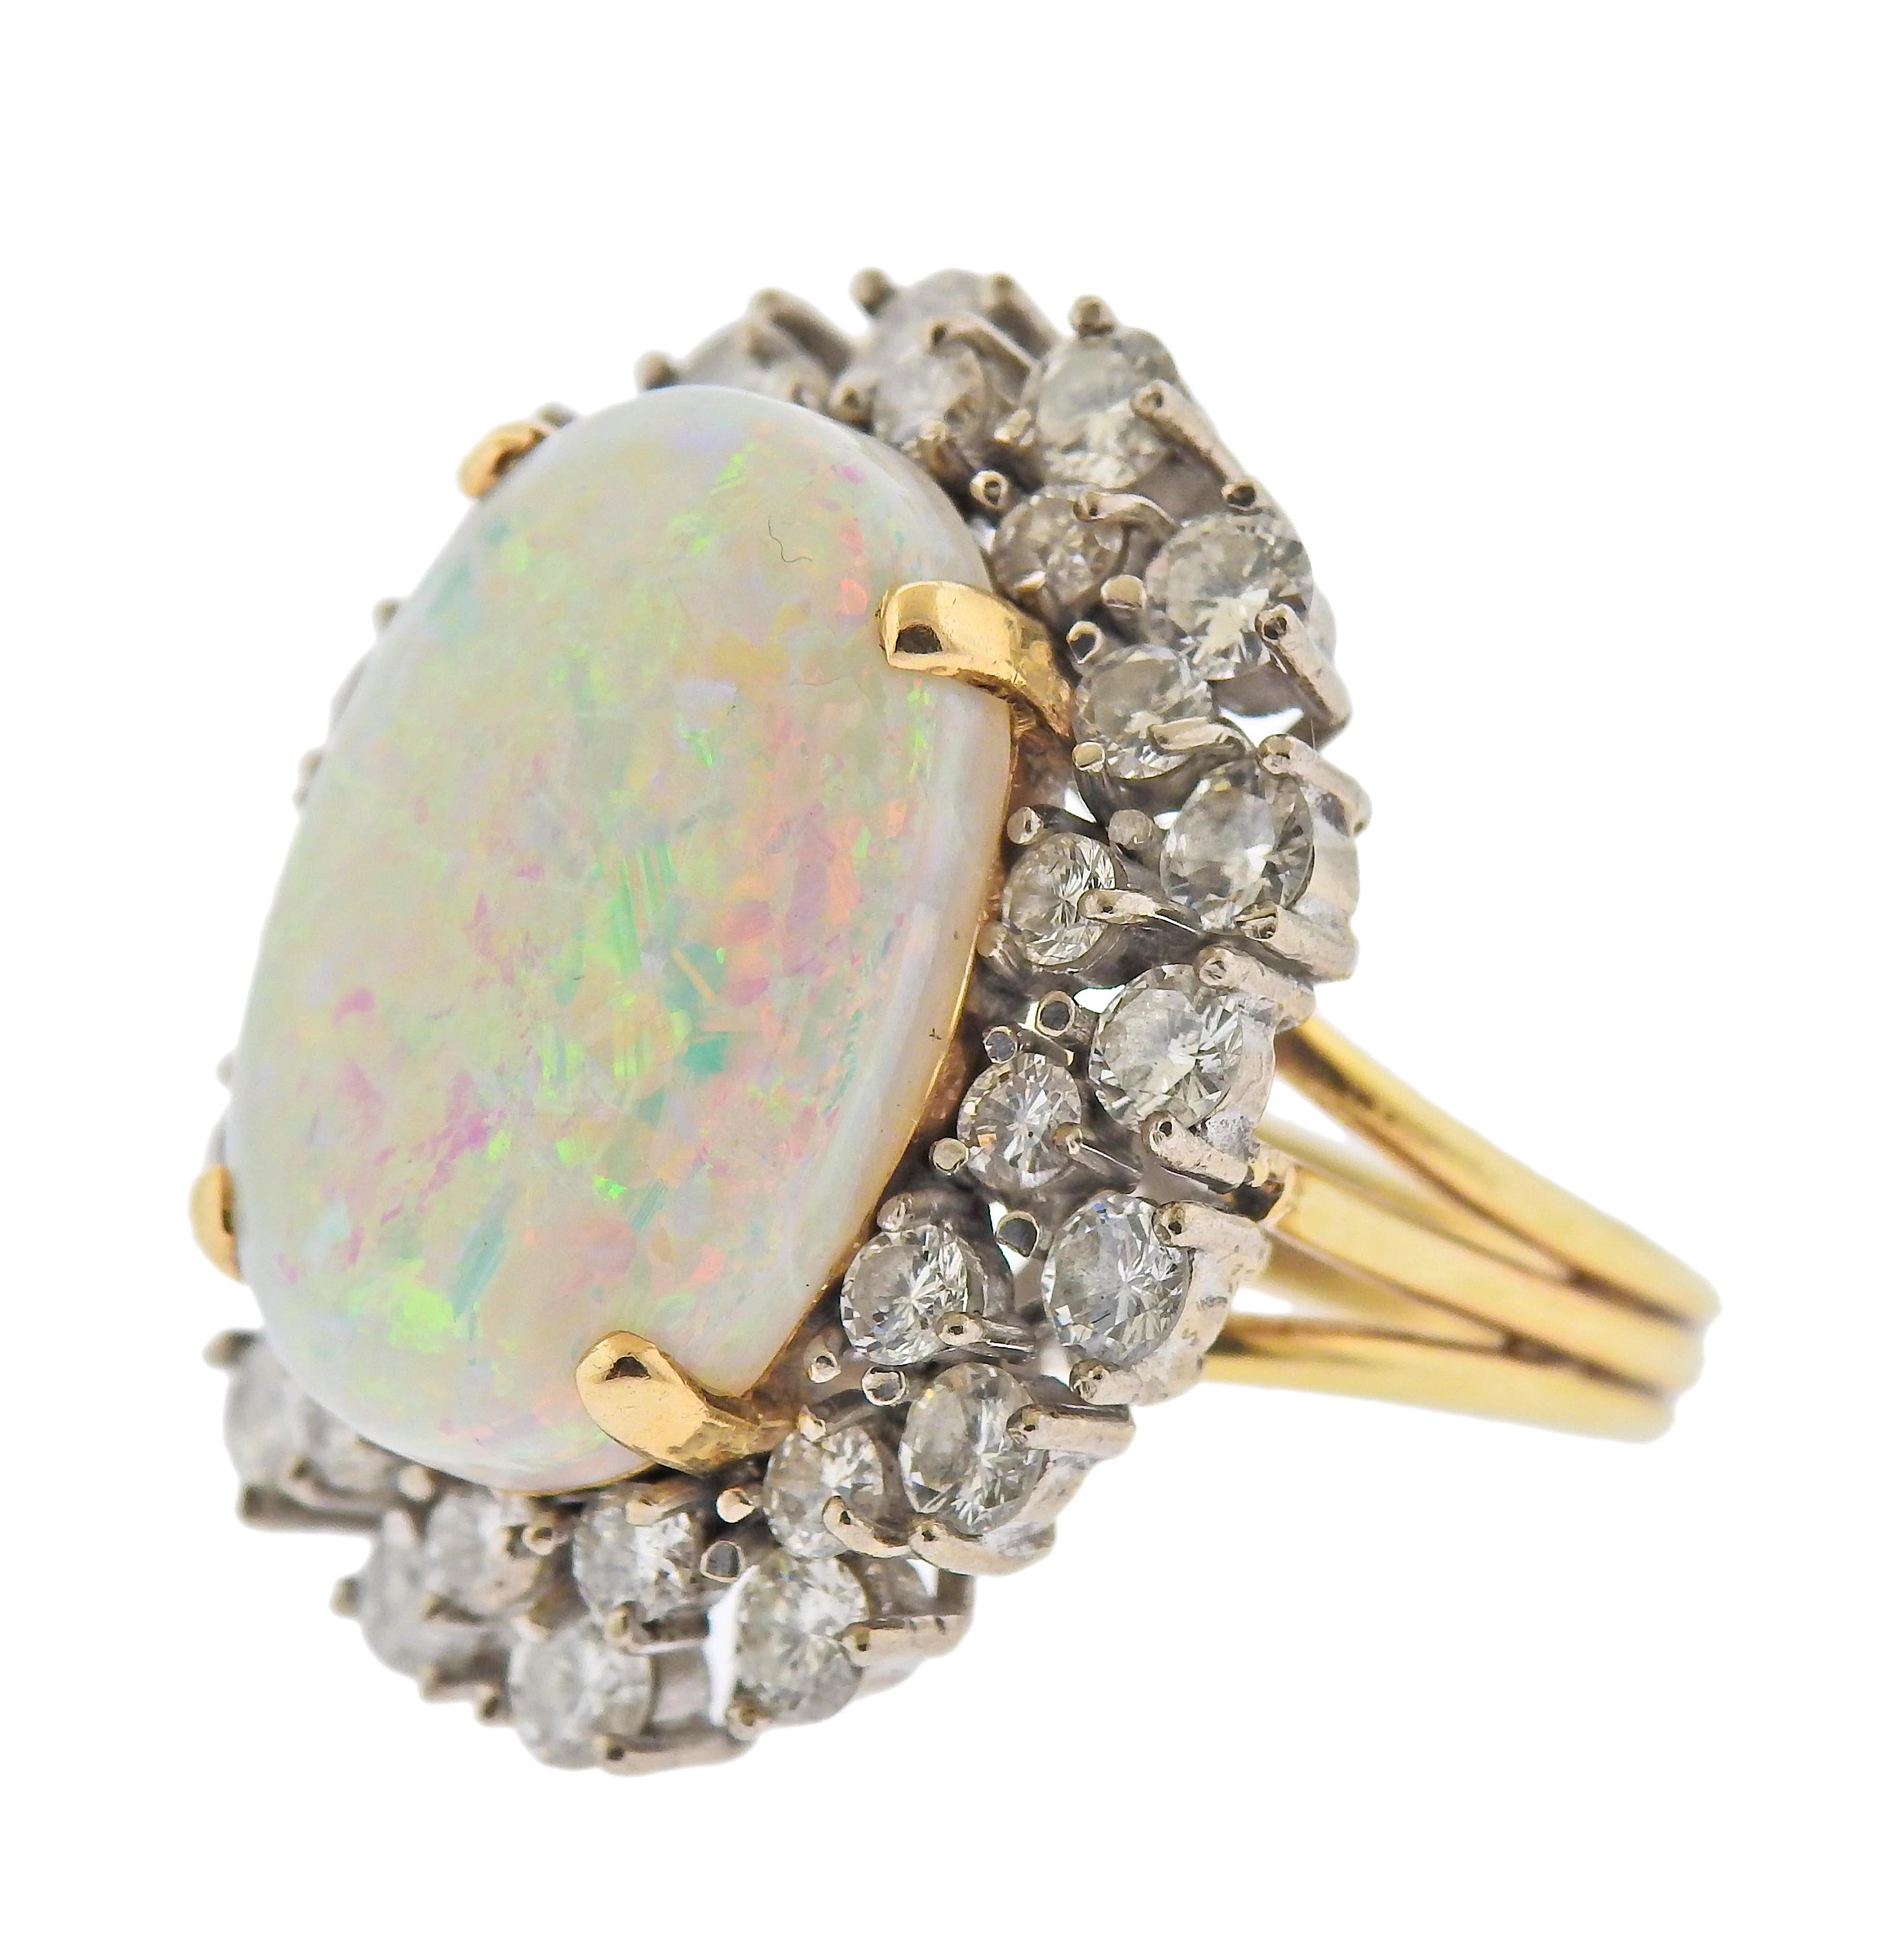 14k gold cocktail ring with approx. 13.5 carat oval opal, measuring 21.3 x 15 x 7.35mm, surrounded with approx. 3.20ctw in diamonds. Ring size - 8, ring top - 30mm x 25mm. Marked: 14k. Weight - 15.6 grams. 